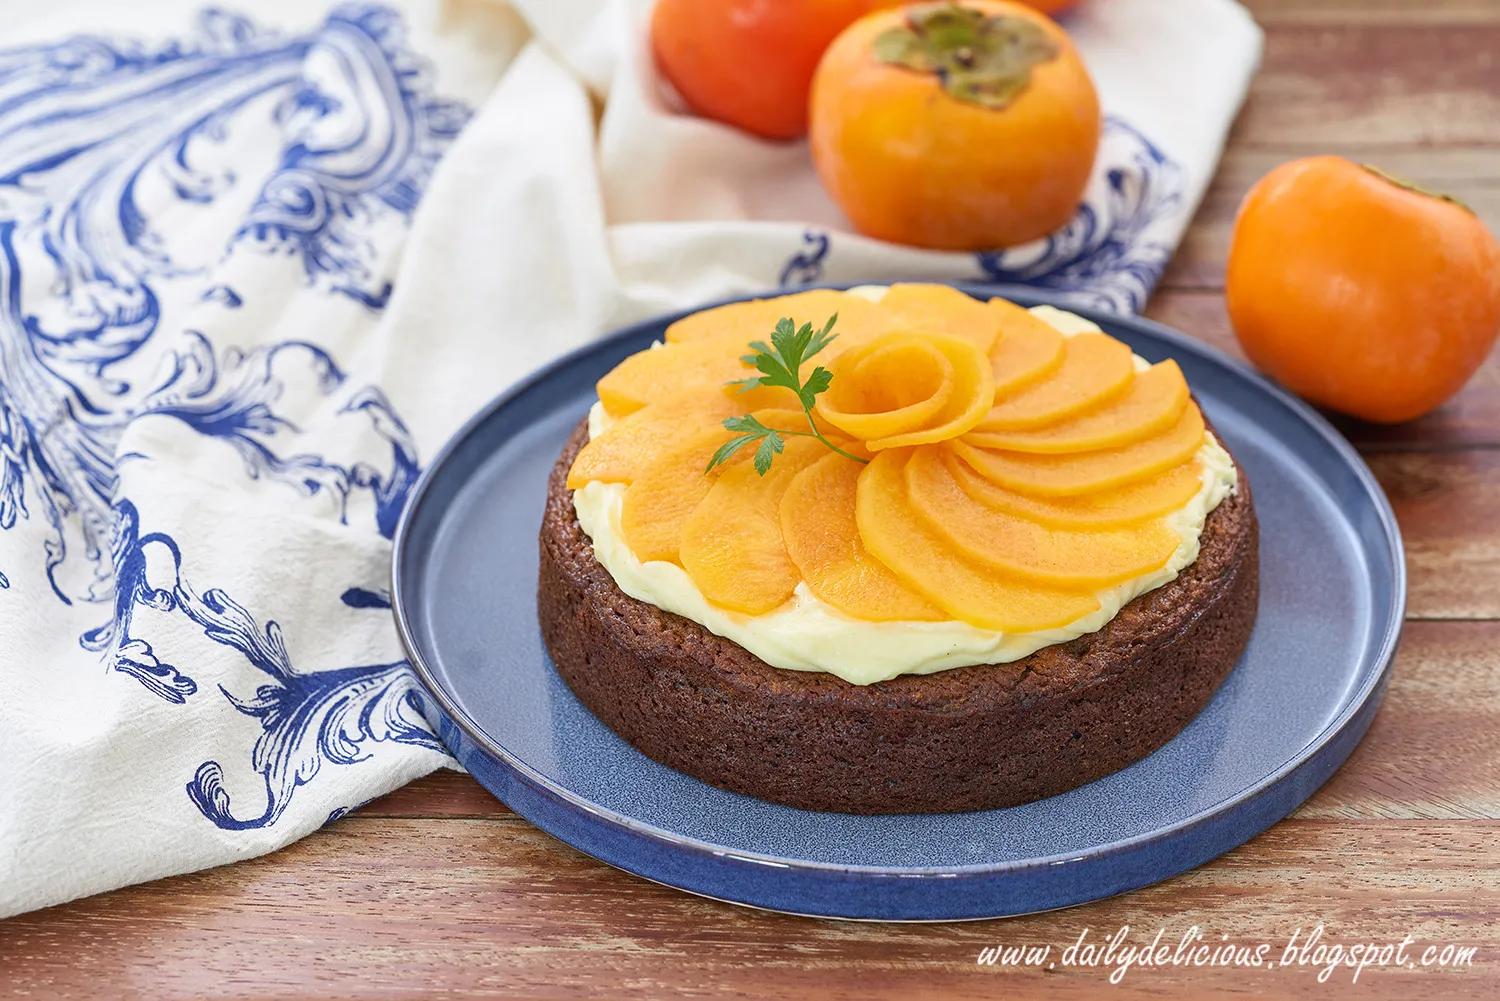 dailydelicious: Persimmon Pudding Cake with cream cheese frosting